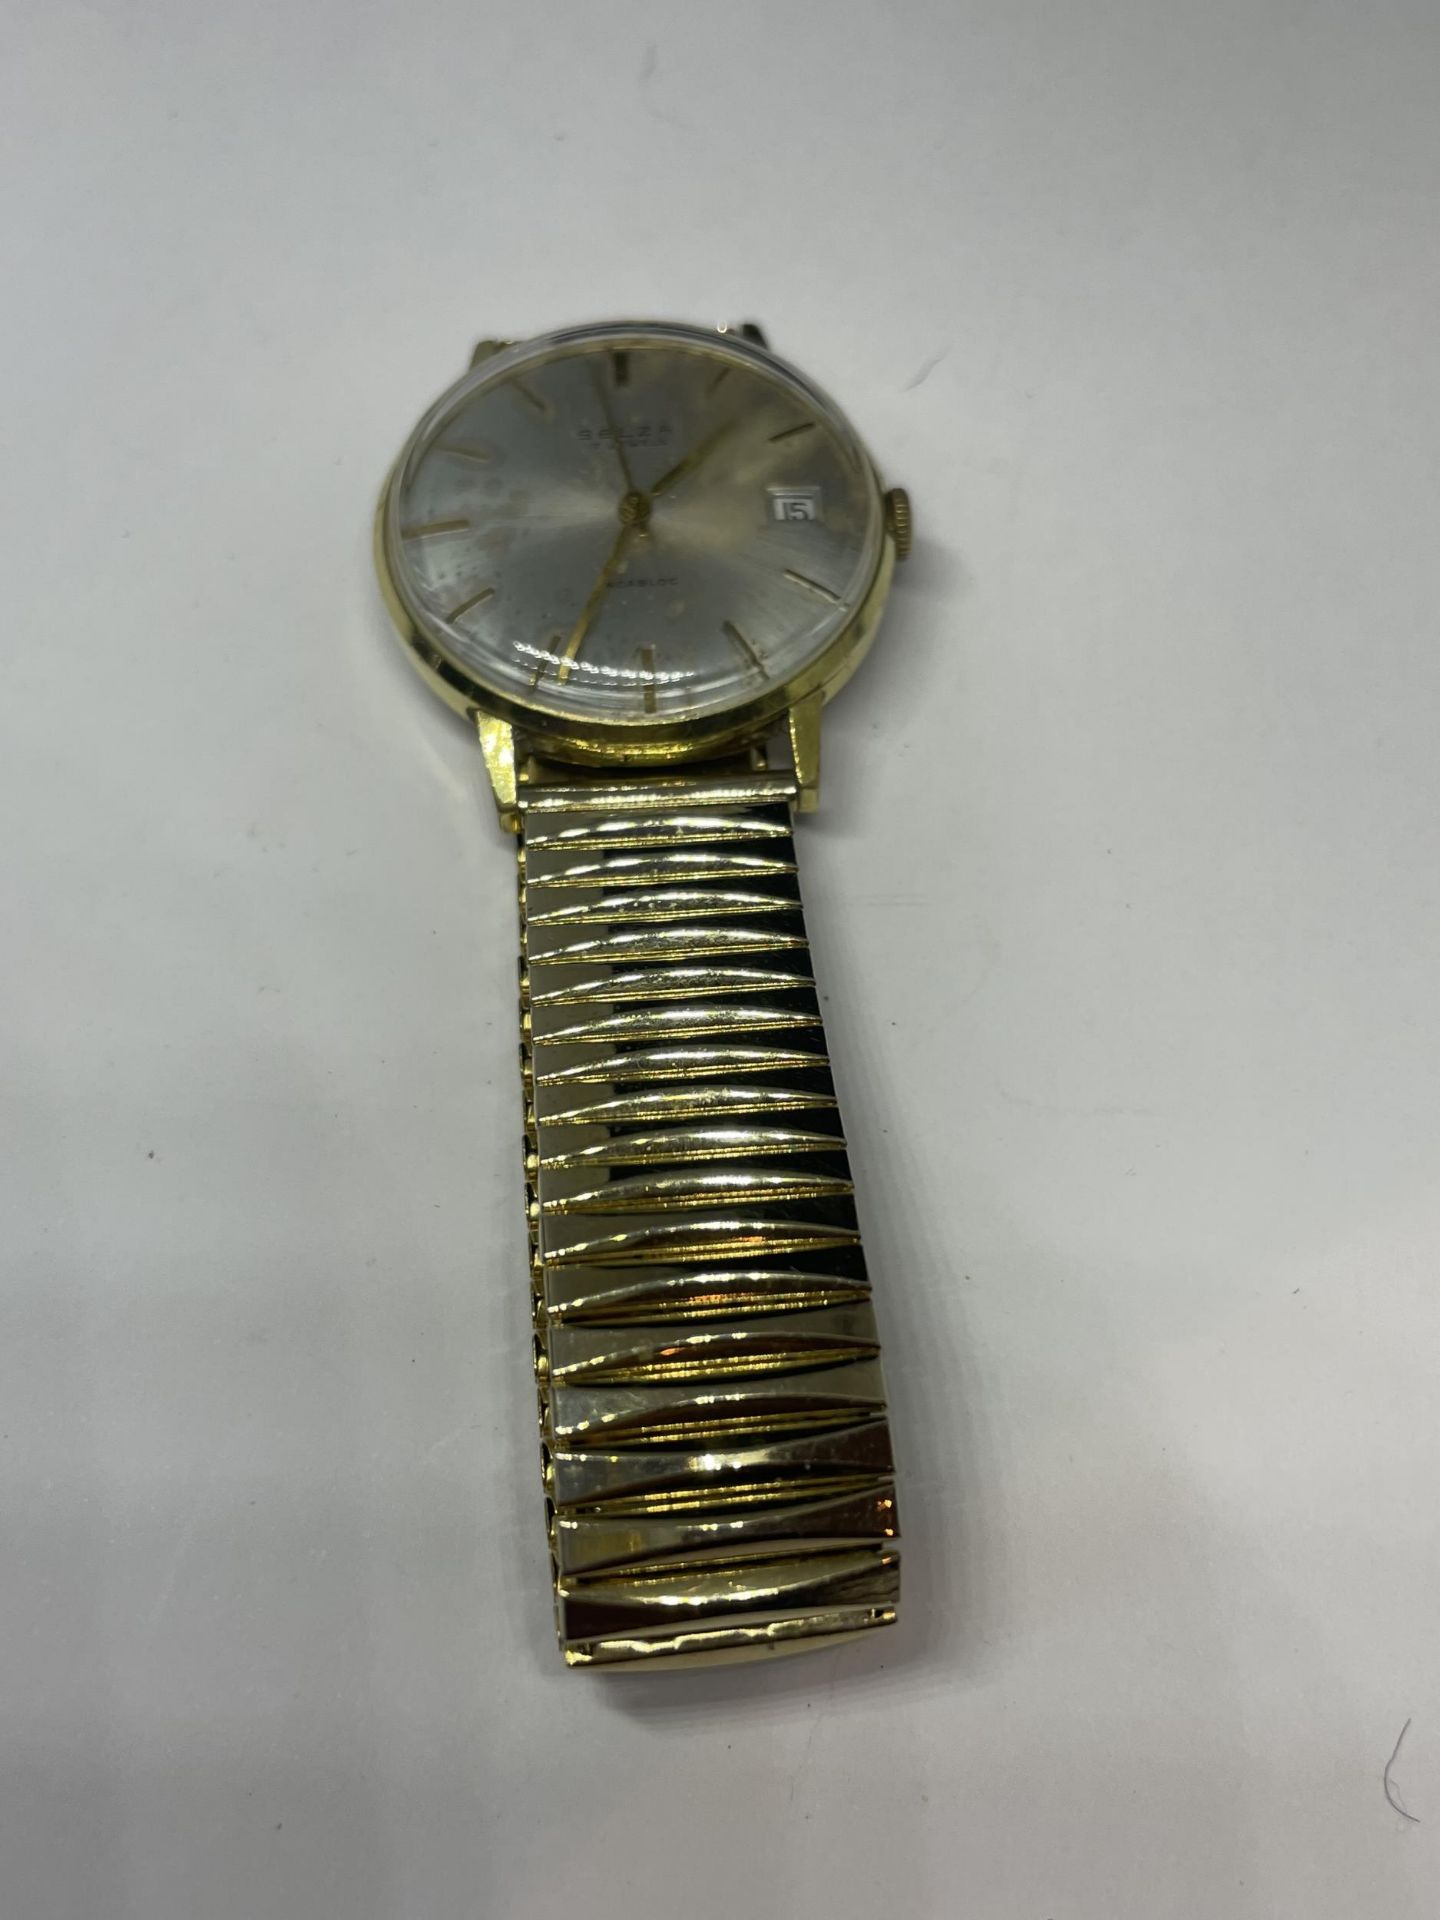 A VINTAGE SELZA GENTS WRIST WATCH, SEEN WORKING BUT NO WARRANTIES GIVEN - Image 2 of 4